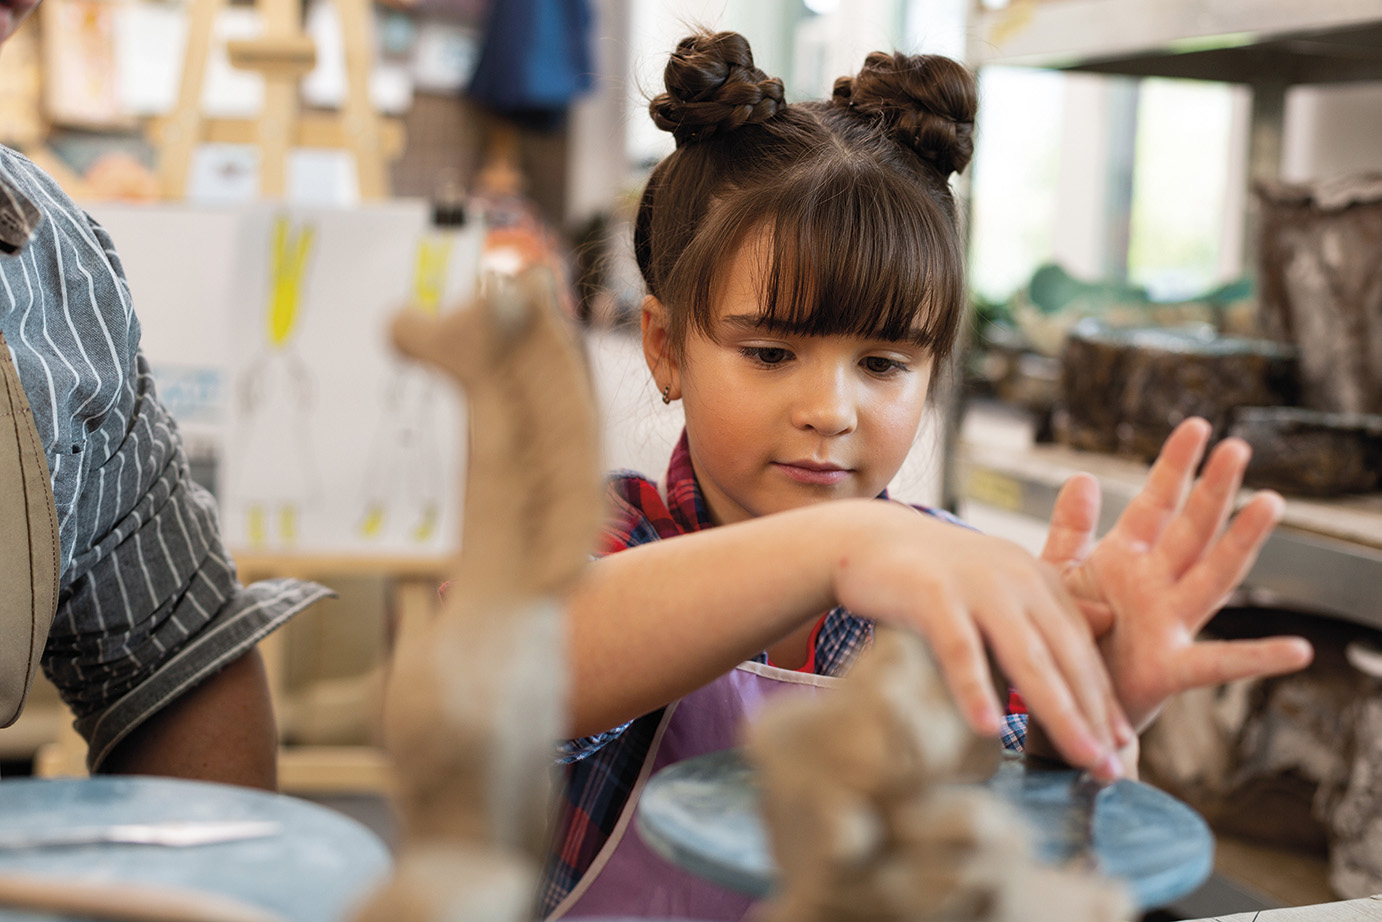 Using hands. Dark-eyed schoolgirl with nice hairstyle using her hands while sculpting clay figures